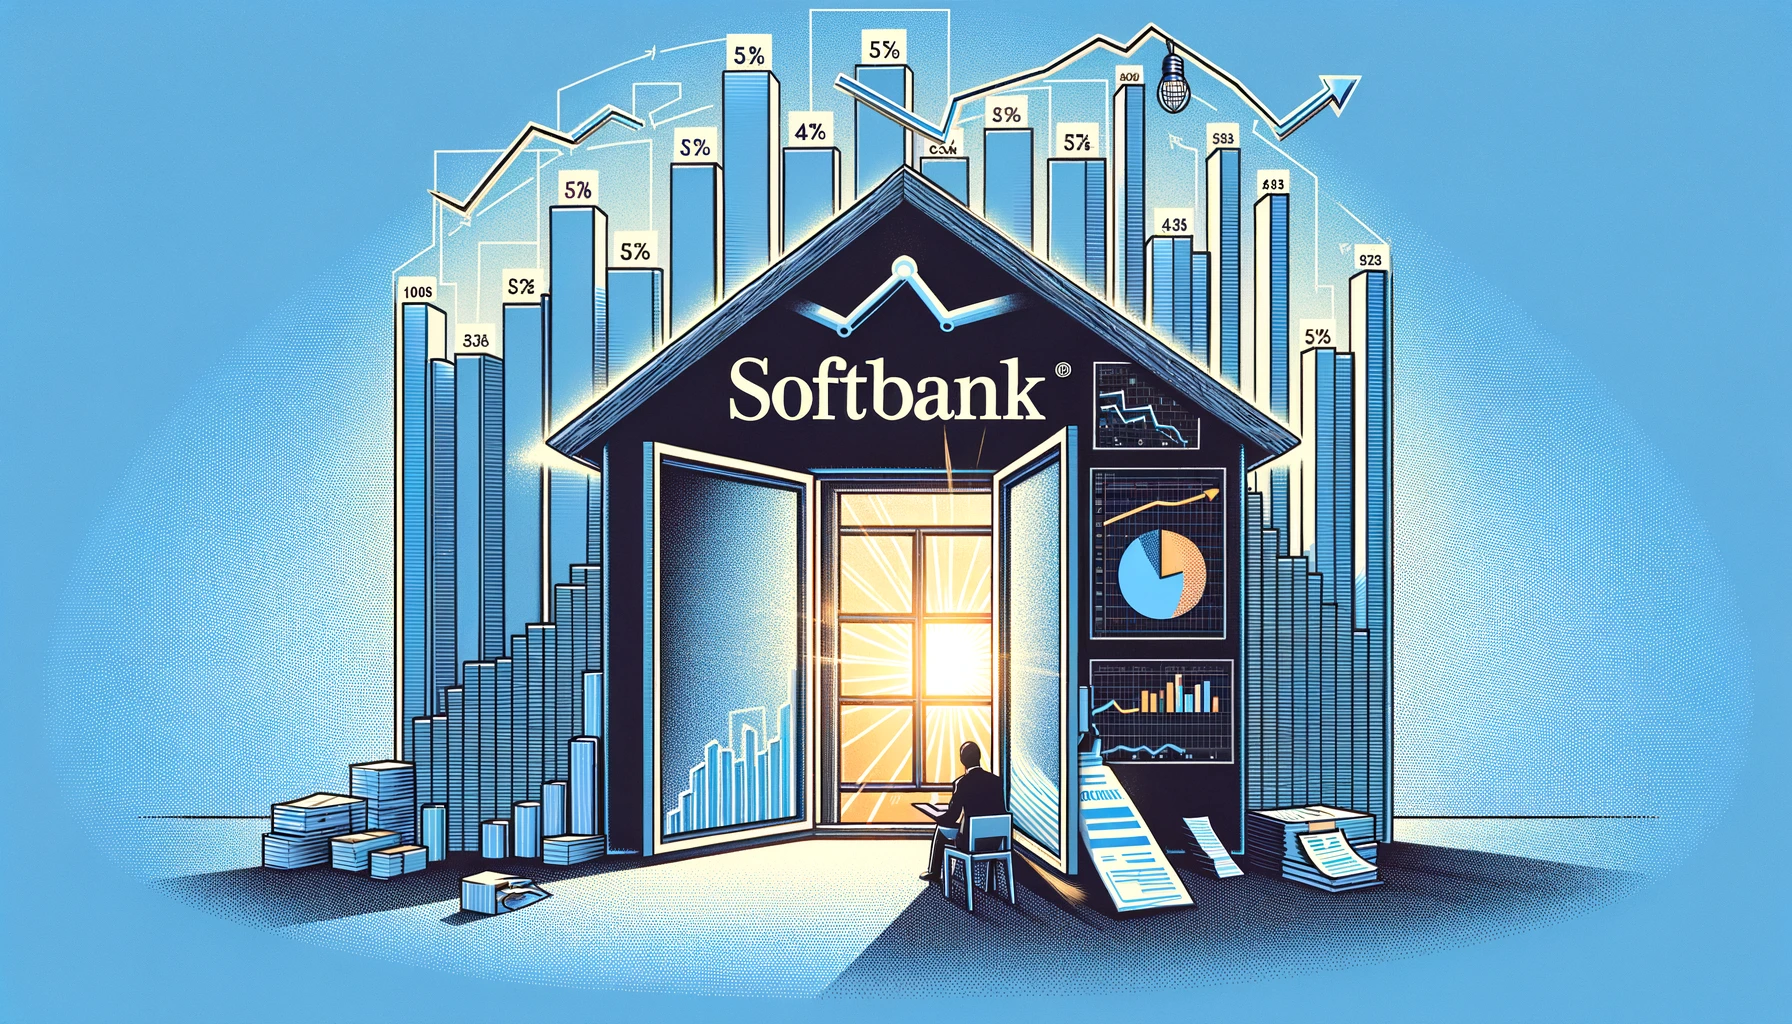 Window manufacturer supported by SoftBank to declare bankruptcy in an effort to reduce debt burden.